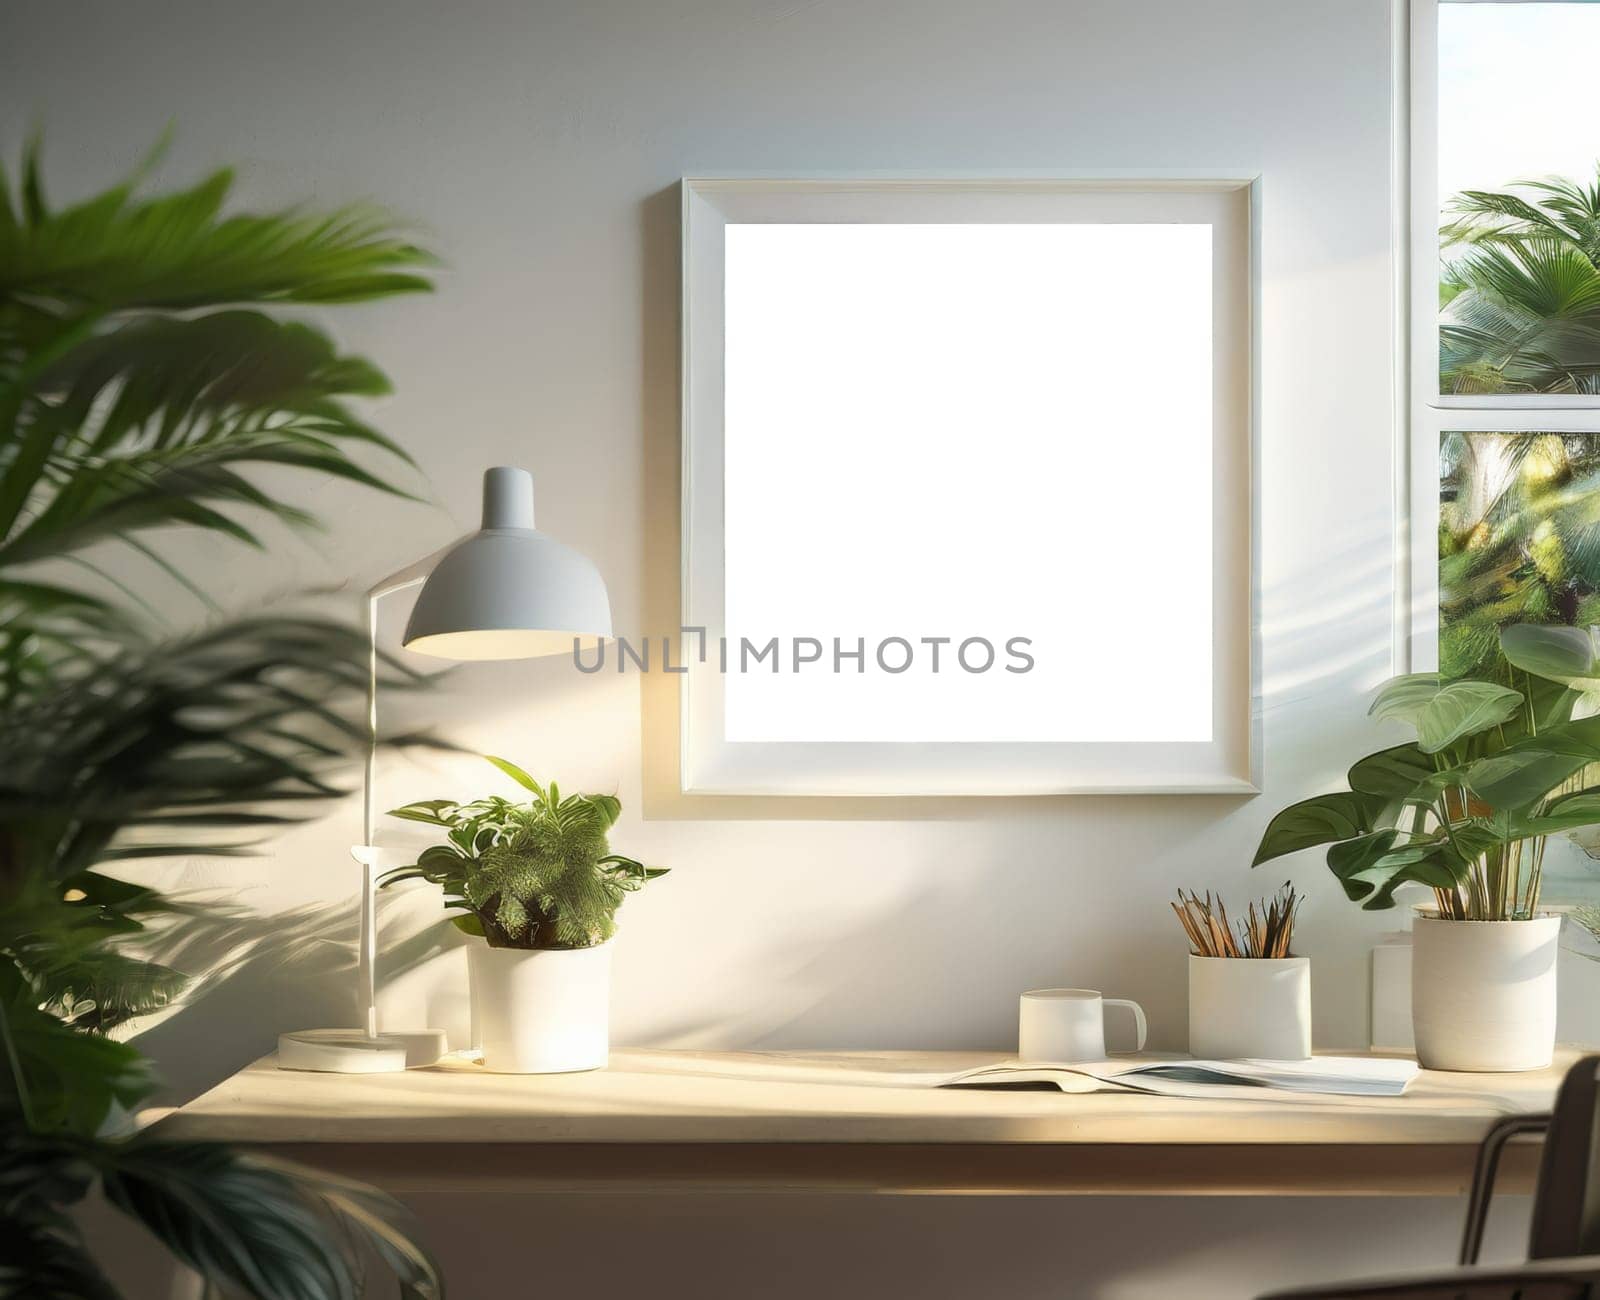 Mock up picture frame in living room interior with urban jungle. Writing desk and chair in room with green plants. Scandinavian and boho style room interior with many natural potted plants